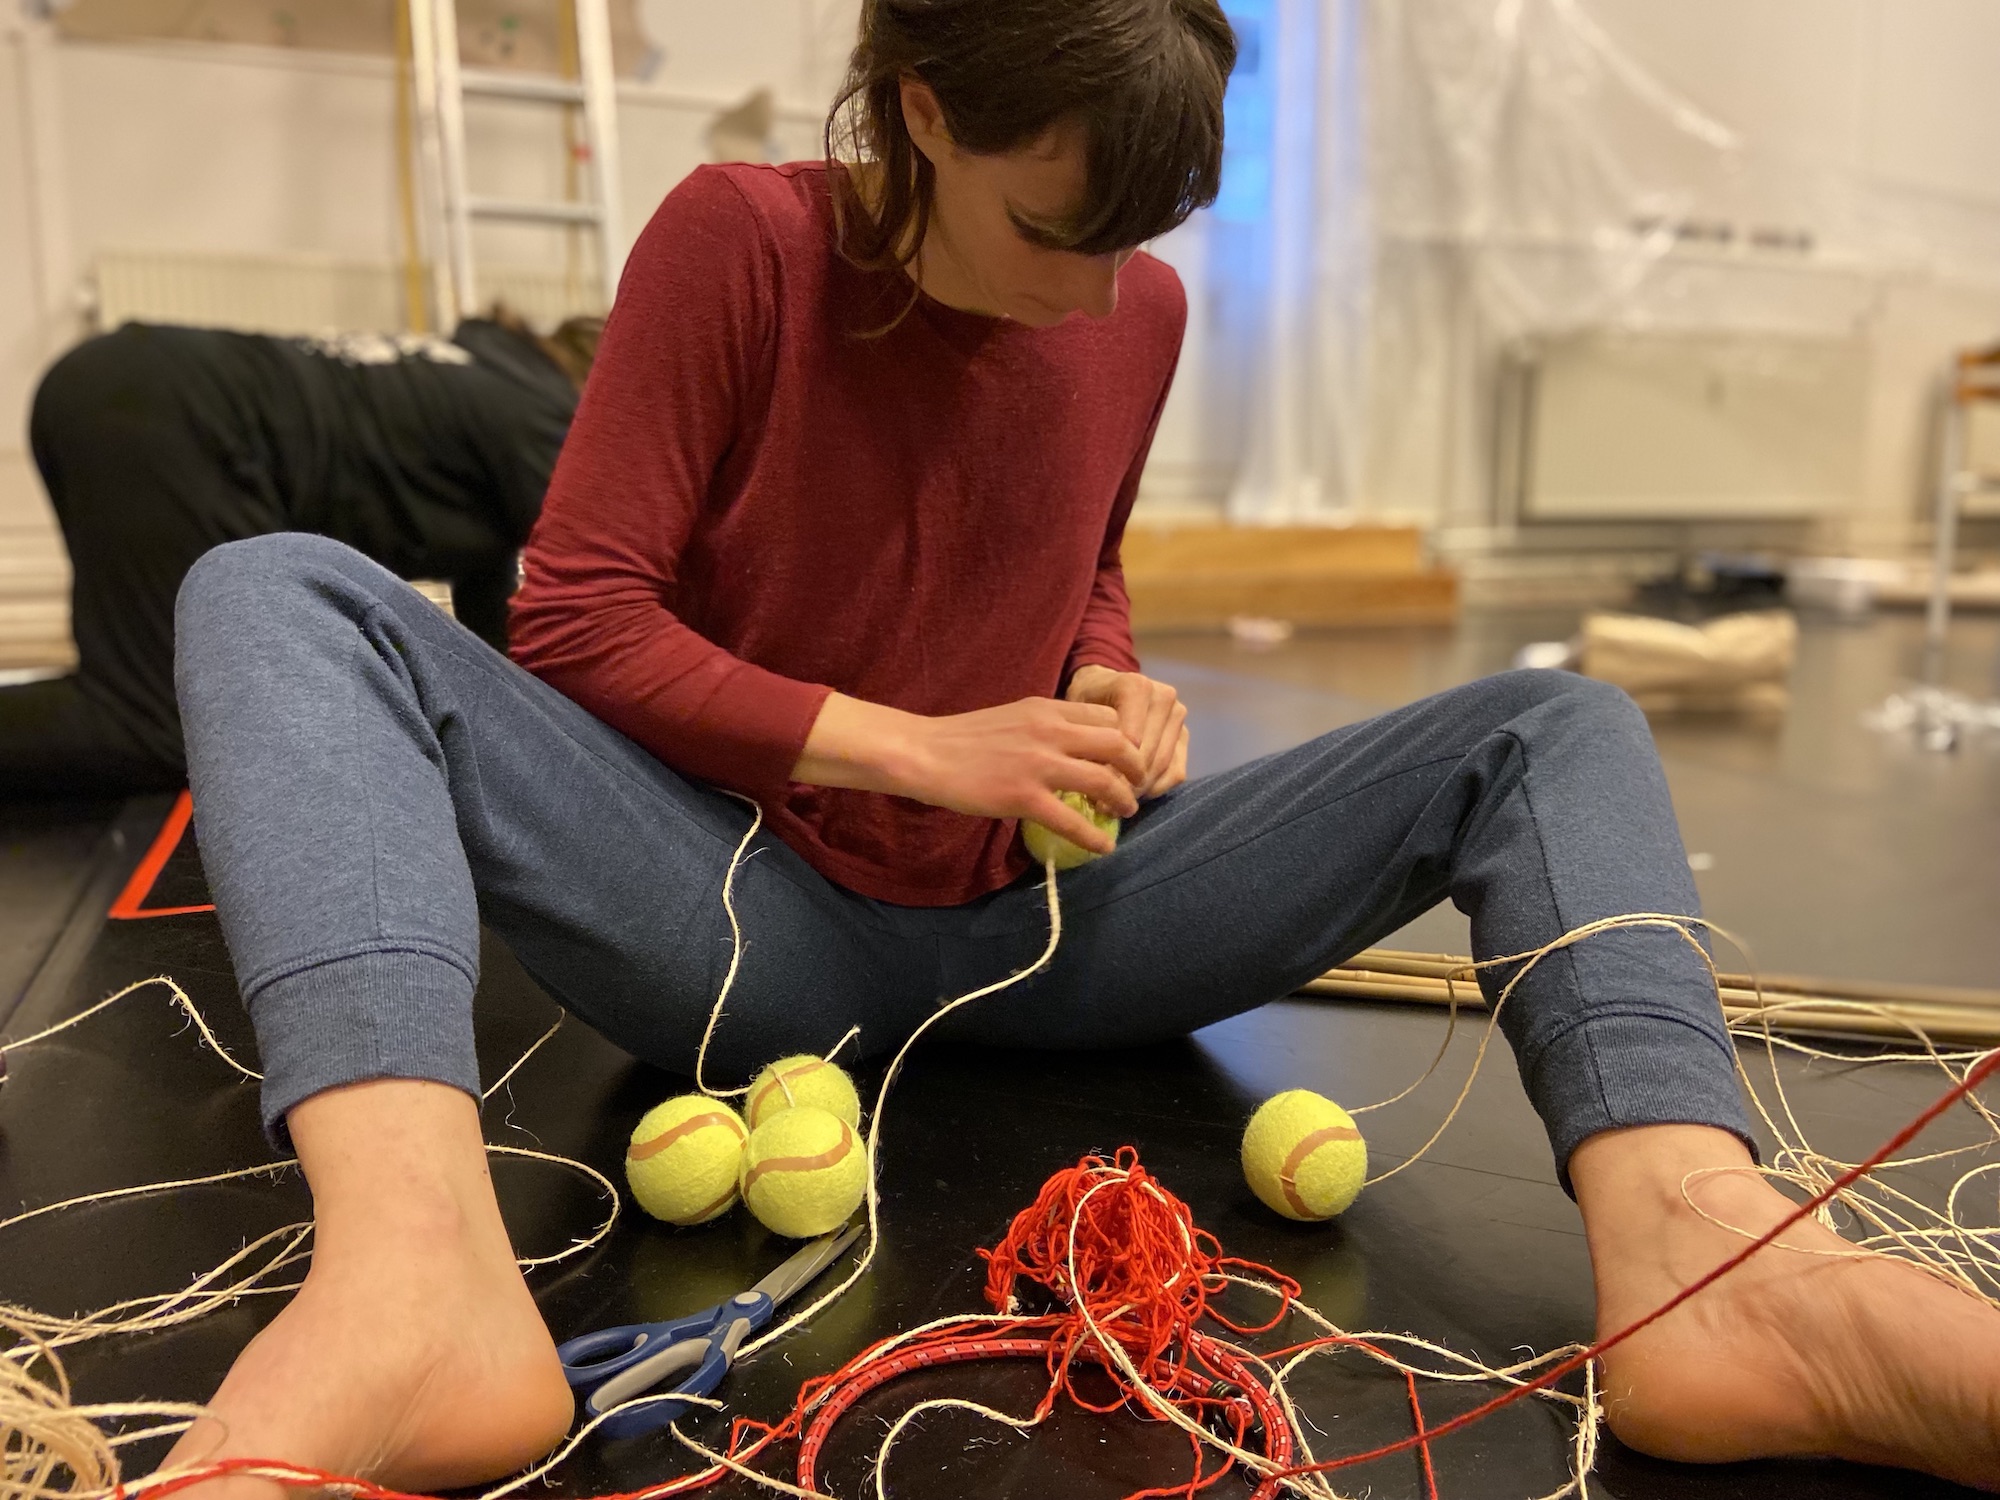 A participant sits on the floor with their knees spread out, making something involving tennis balls and thick string